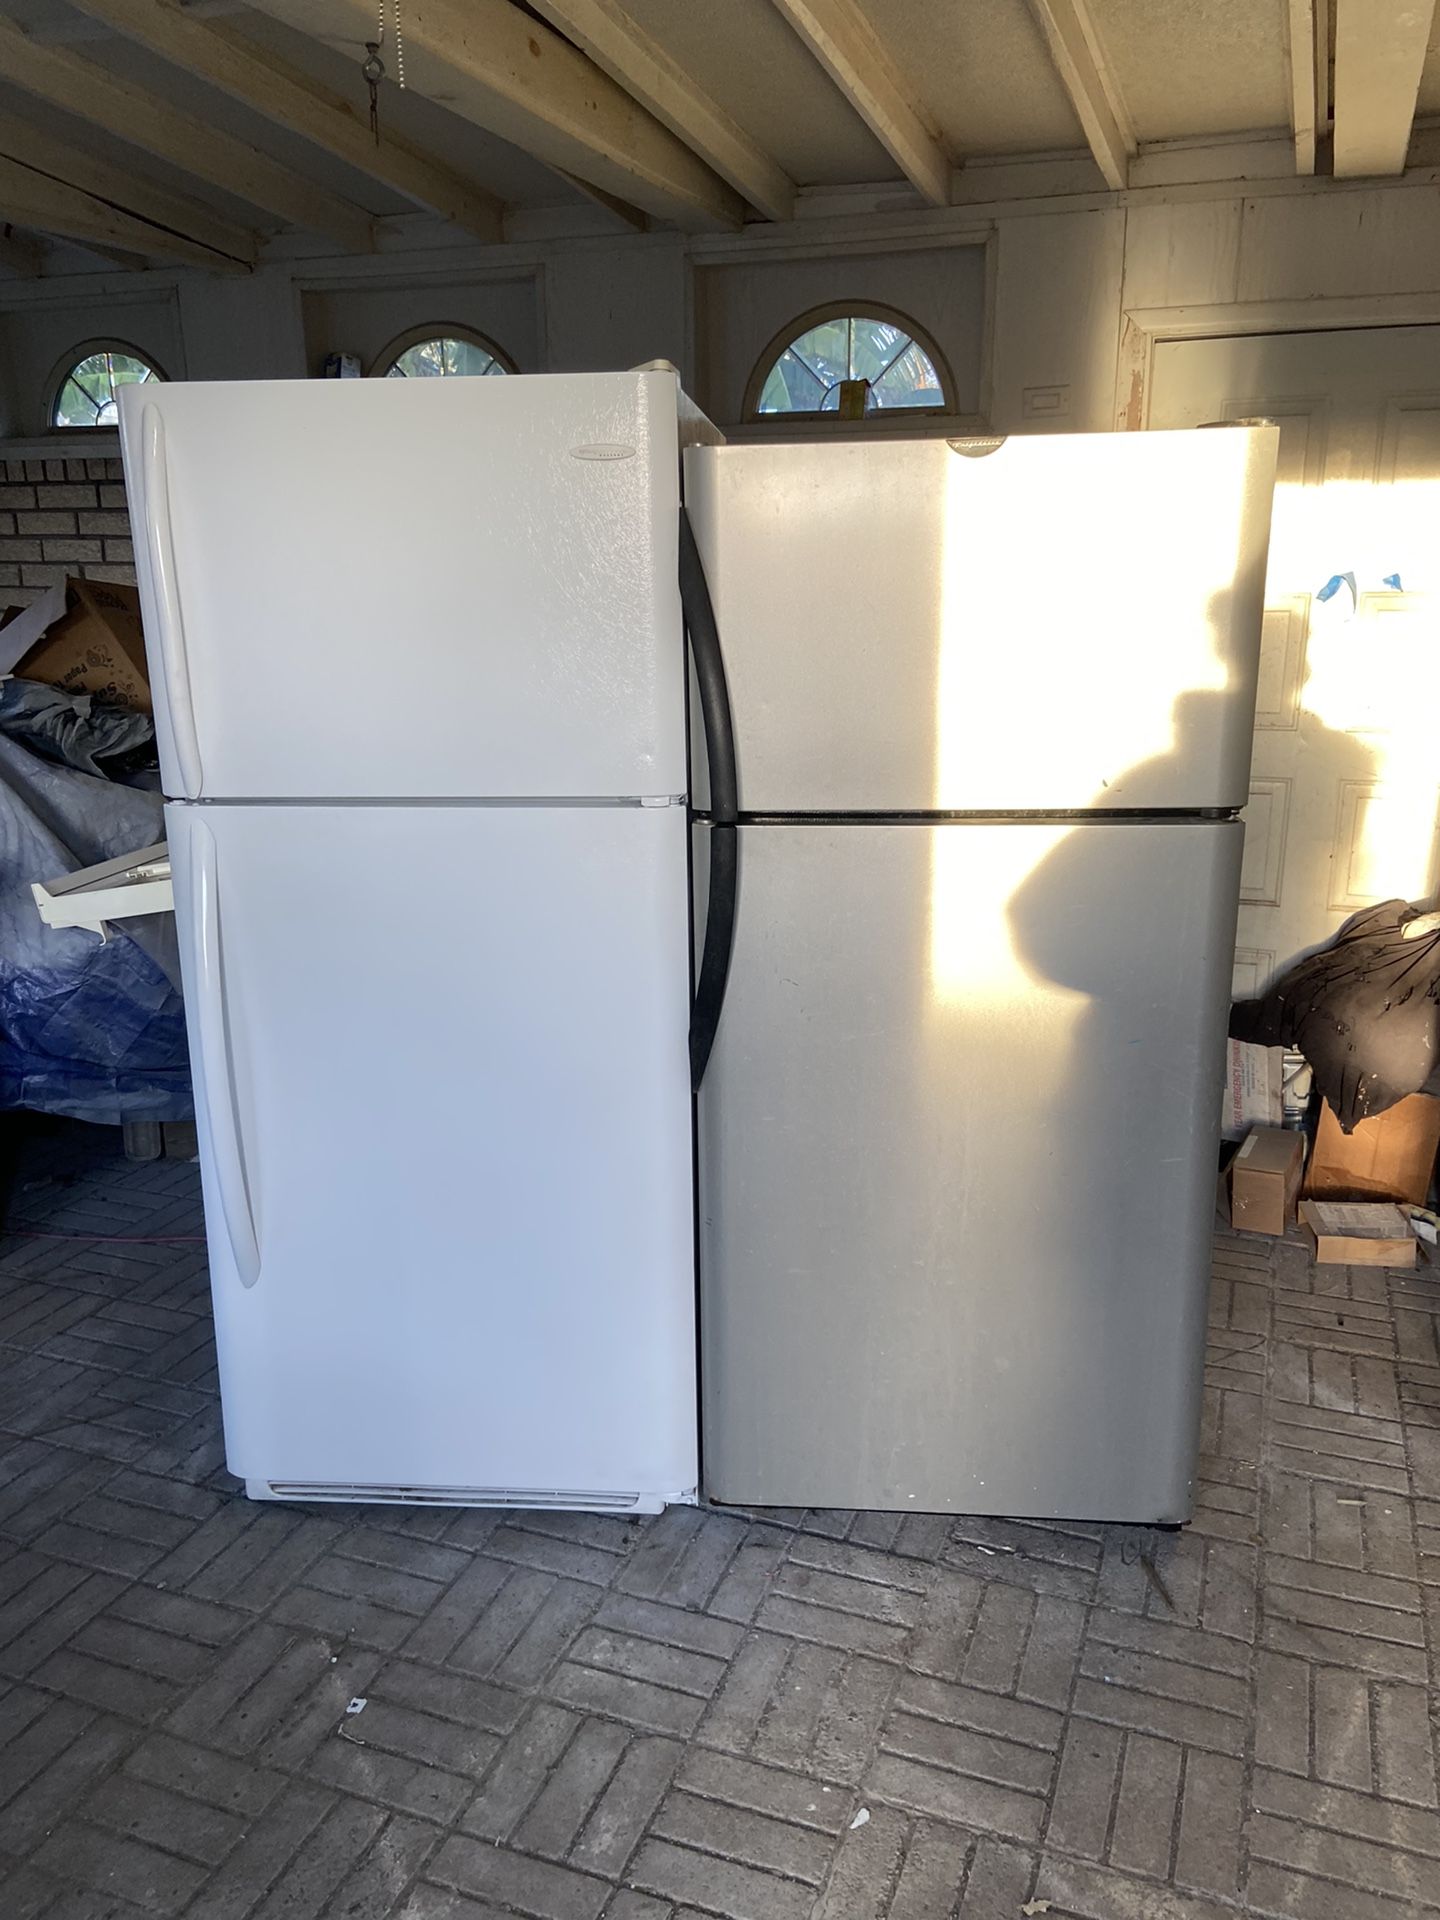 STAINLESS STEEL FRIDGE 18 cu ft  ($275.) Looks like stainless steel but not sure. runs like a brand new one, nothing missing . Also I have white fridg